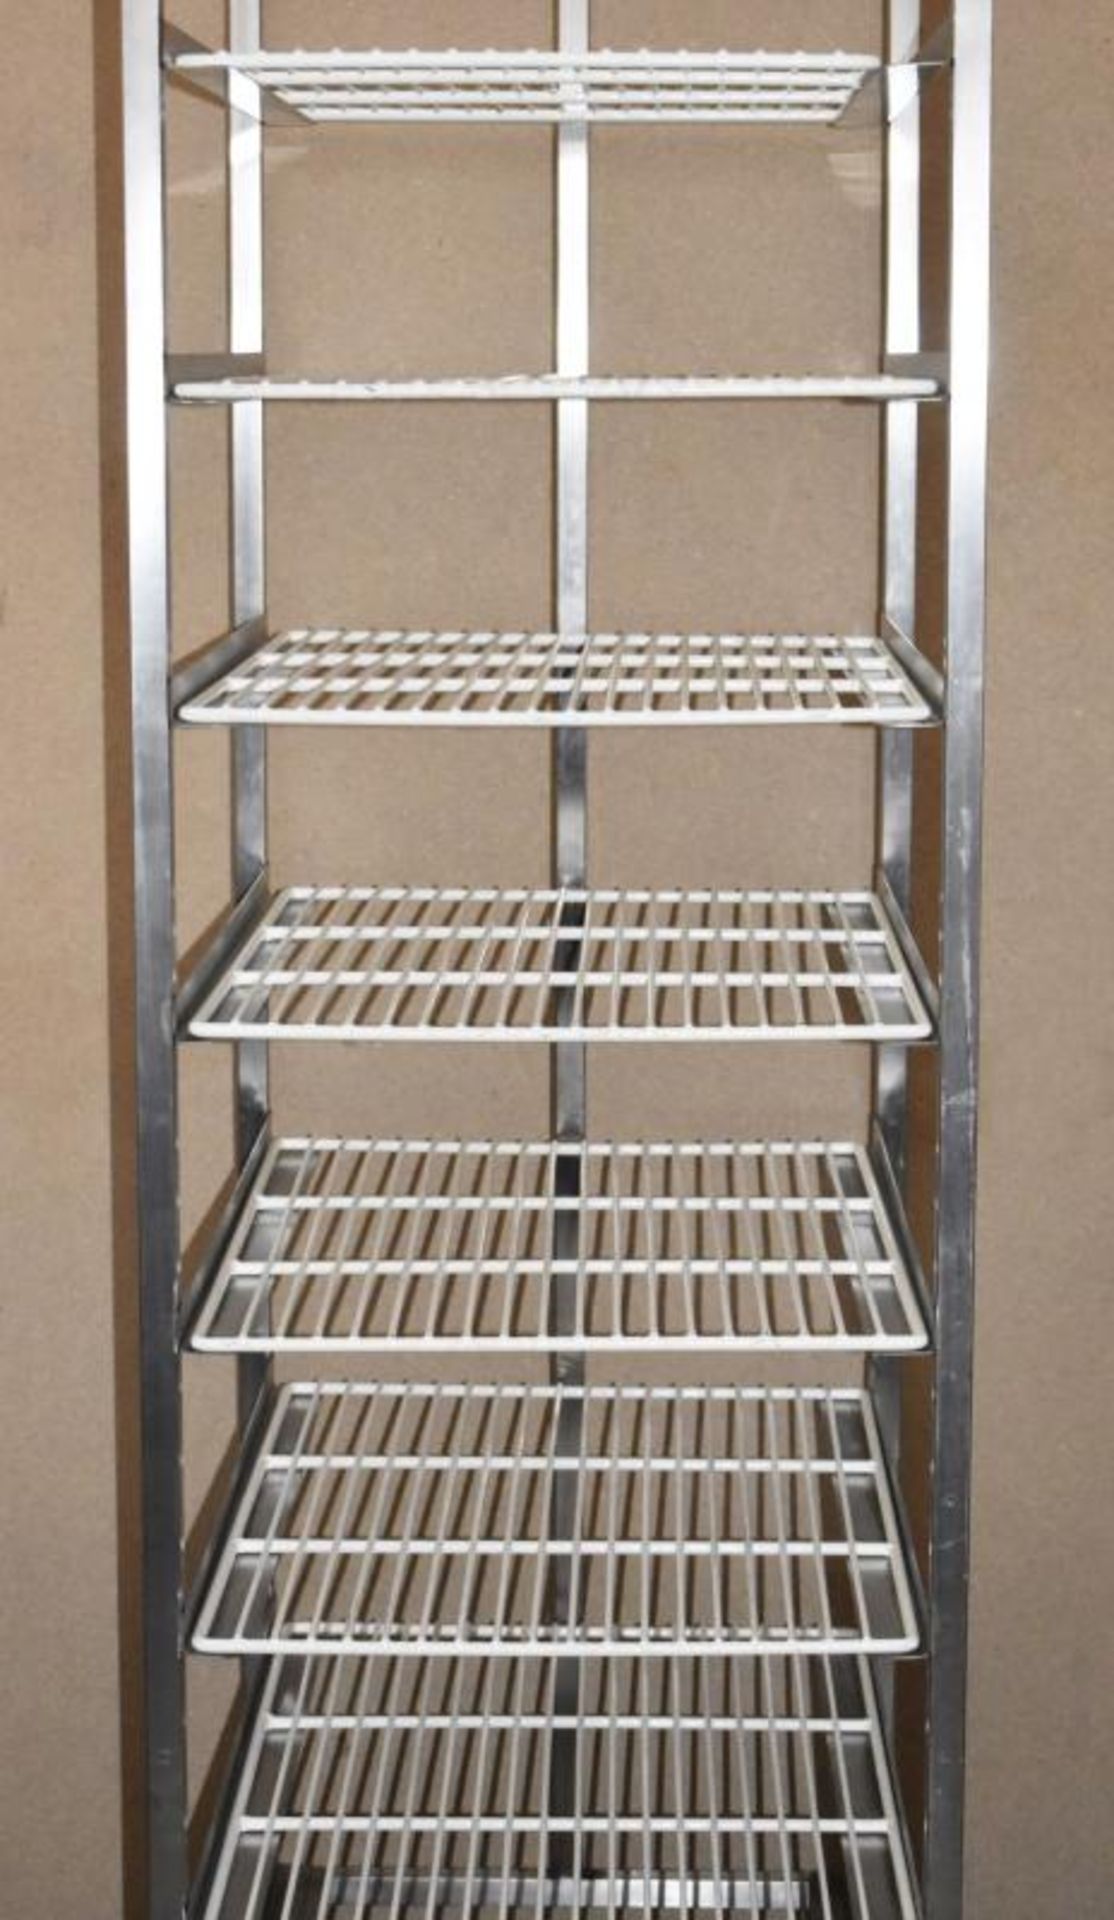 1 x Stainless Steel 8 Tier Mobile Shelf Unit For Commercial Kitchens With White Coated Wire Shelves - Image 11 of 11